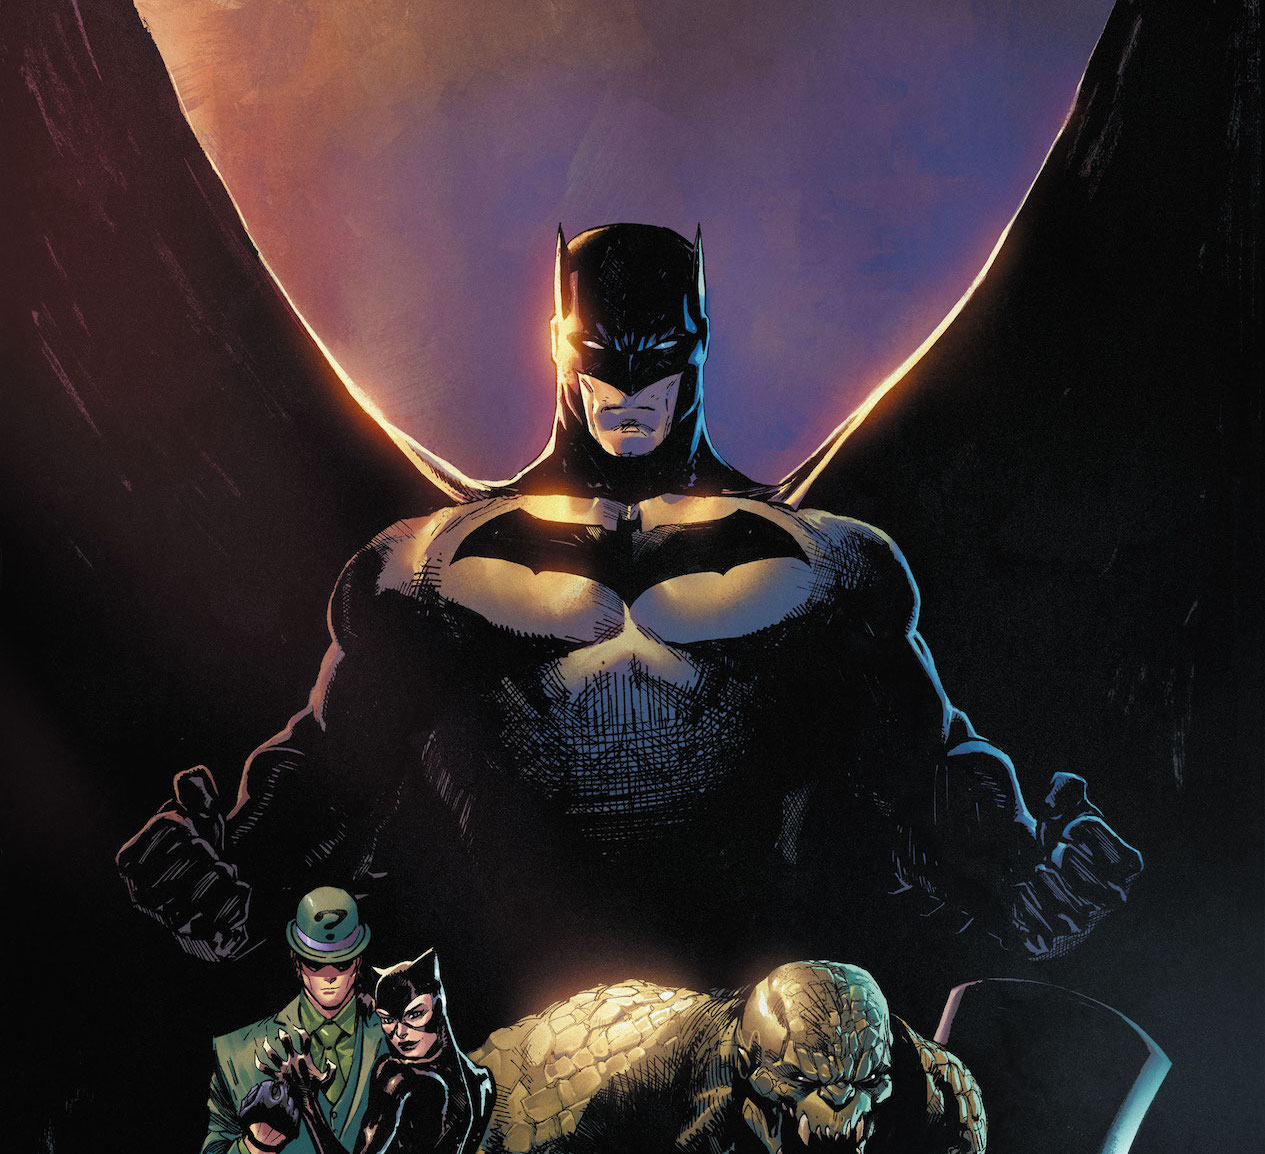 'Batman: Killing Time' #1 is clever, suspenseful and innovative